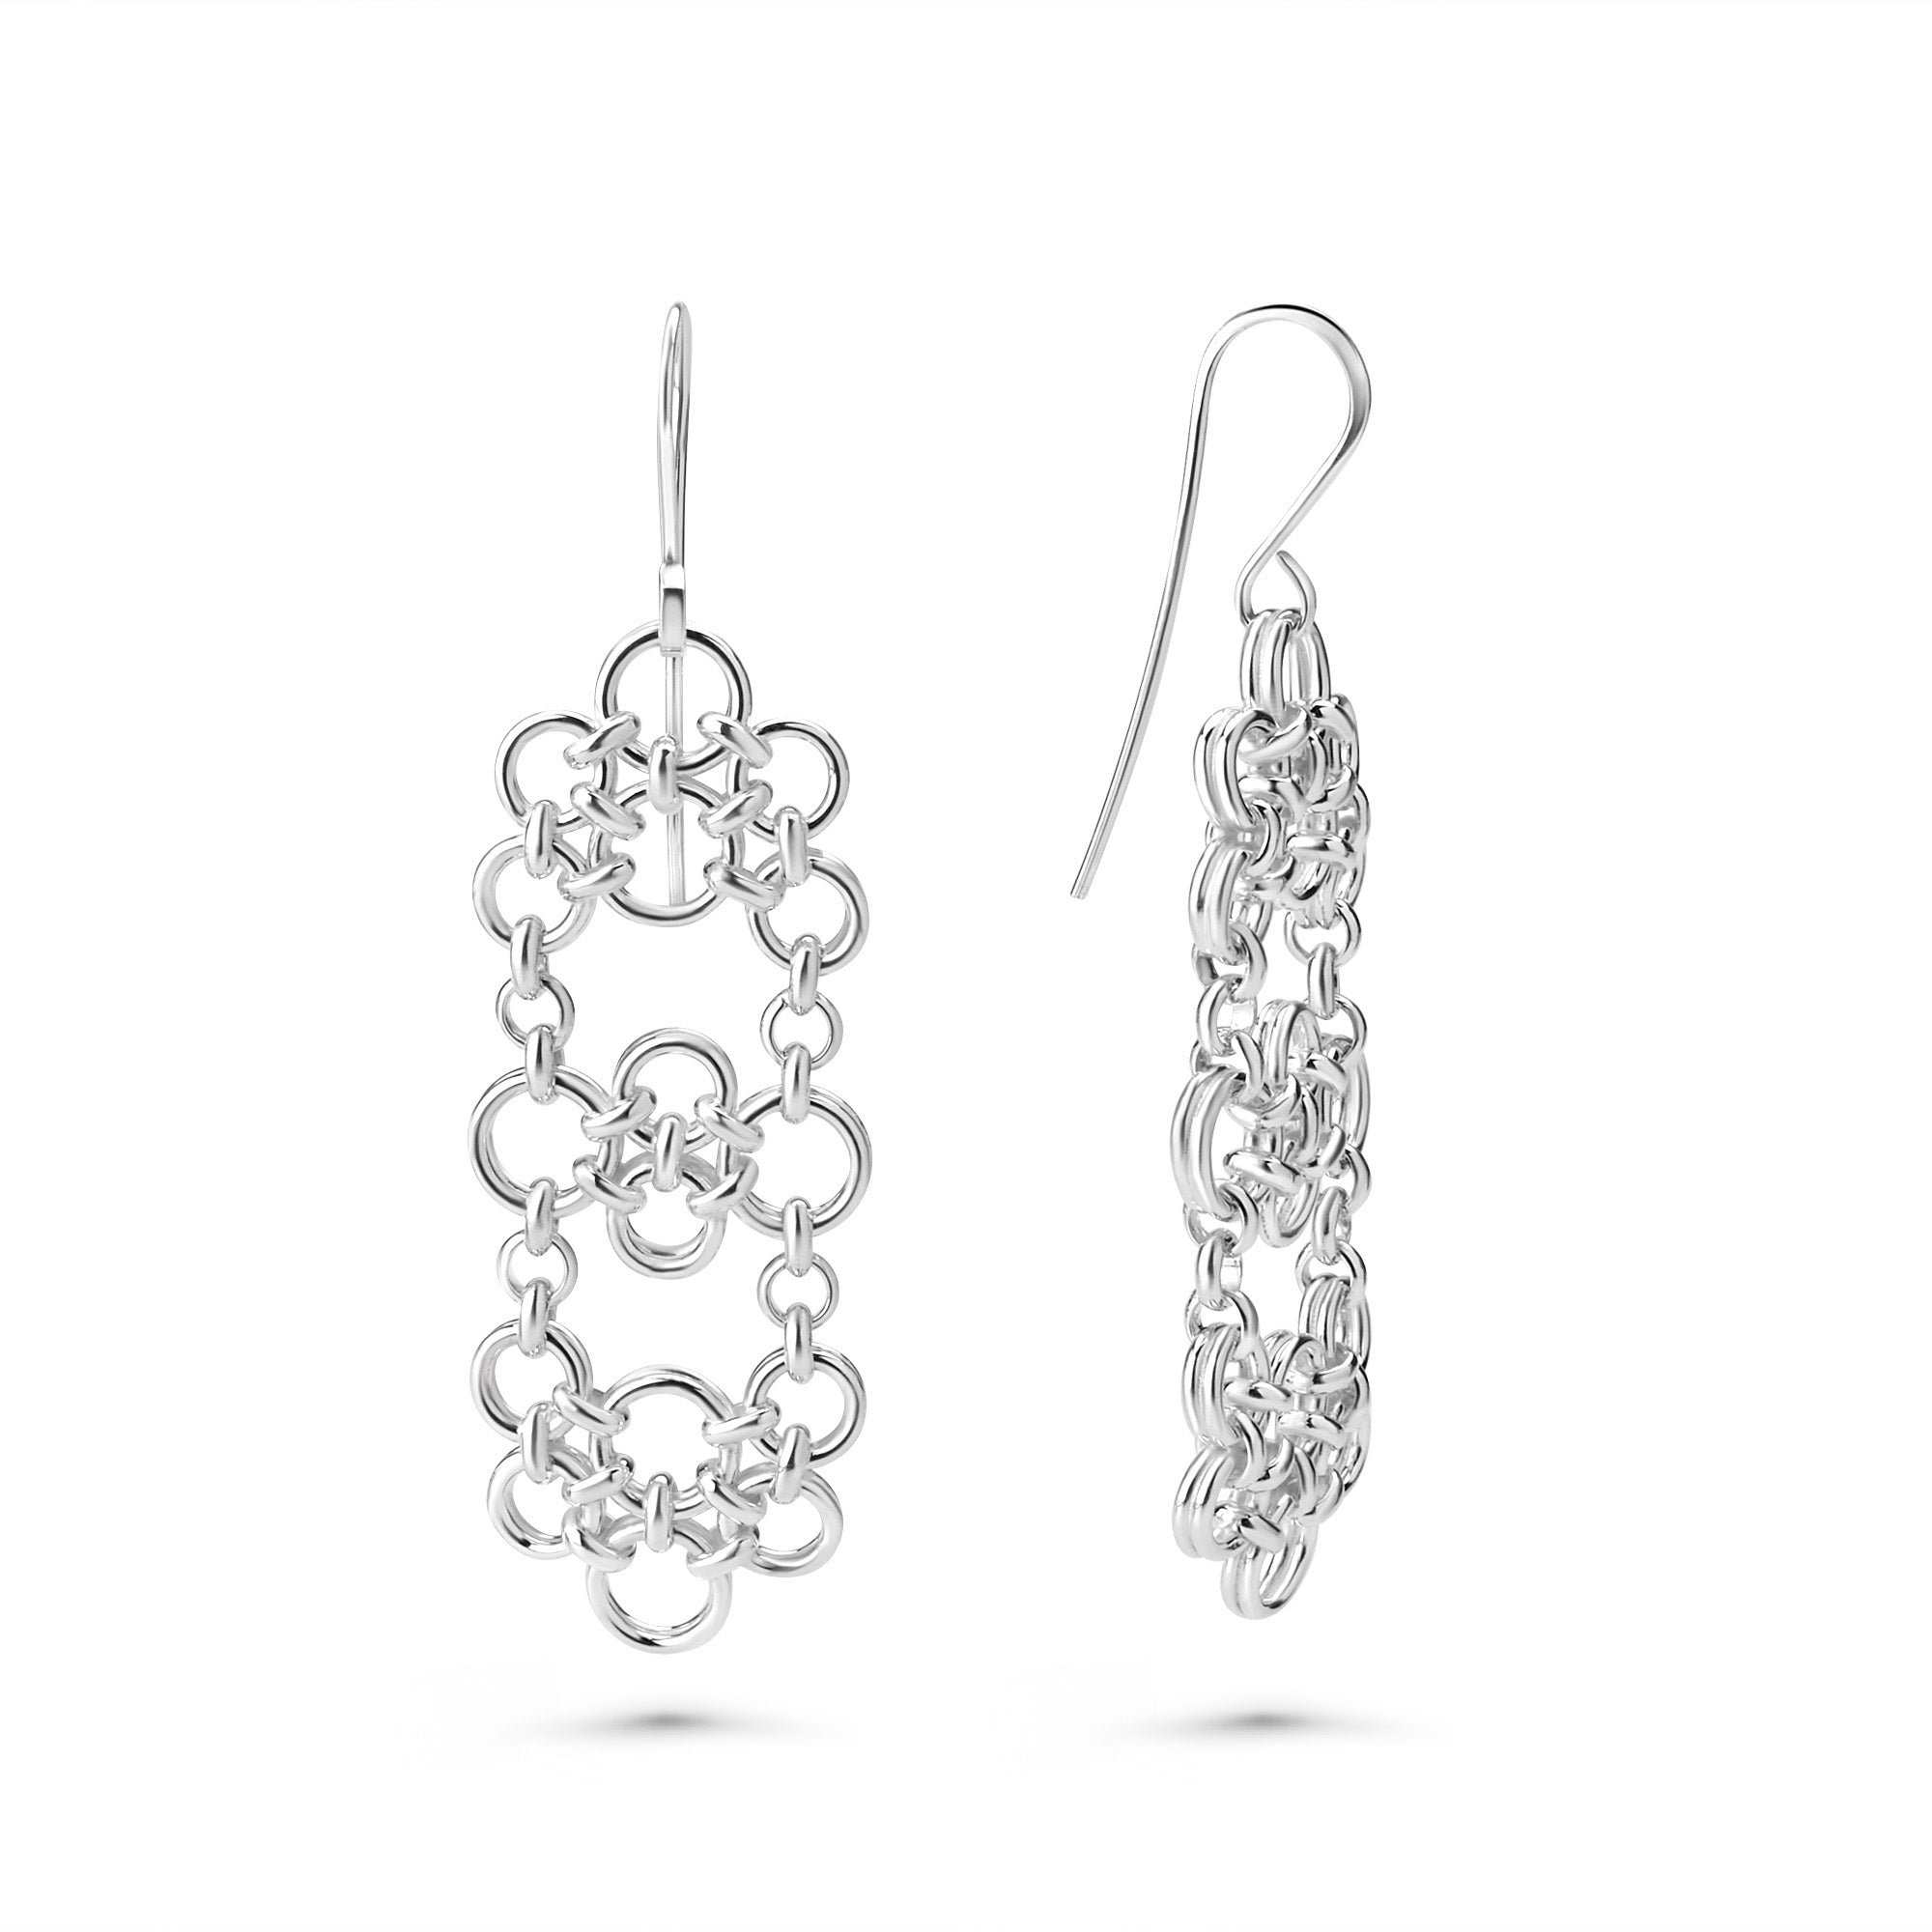 "Cobblestone" Fused Chainmaille Earrings